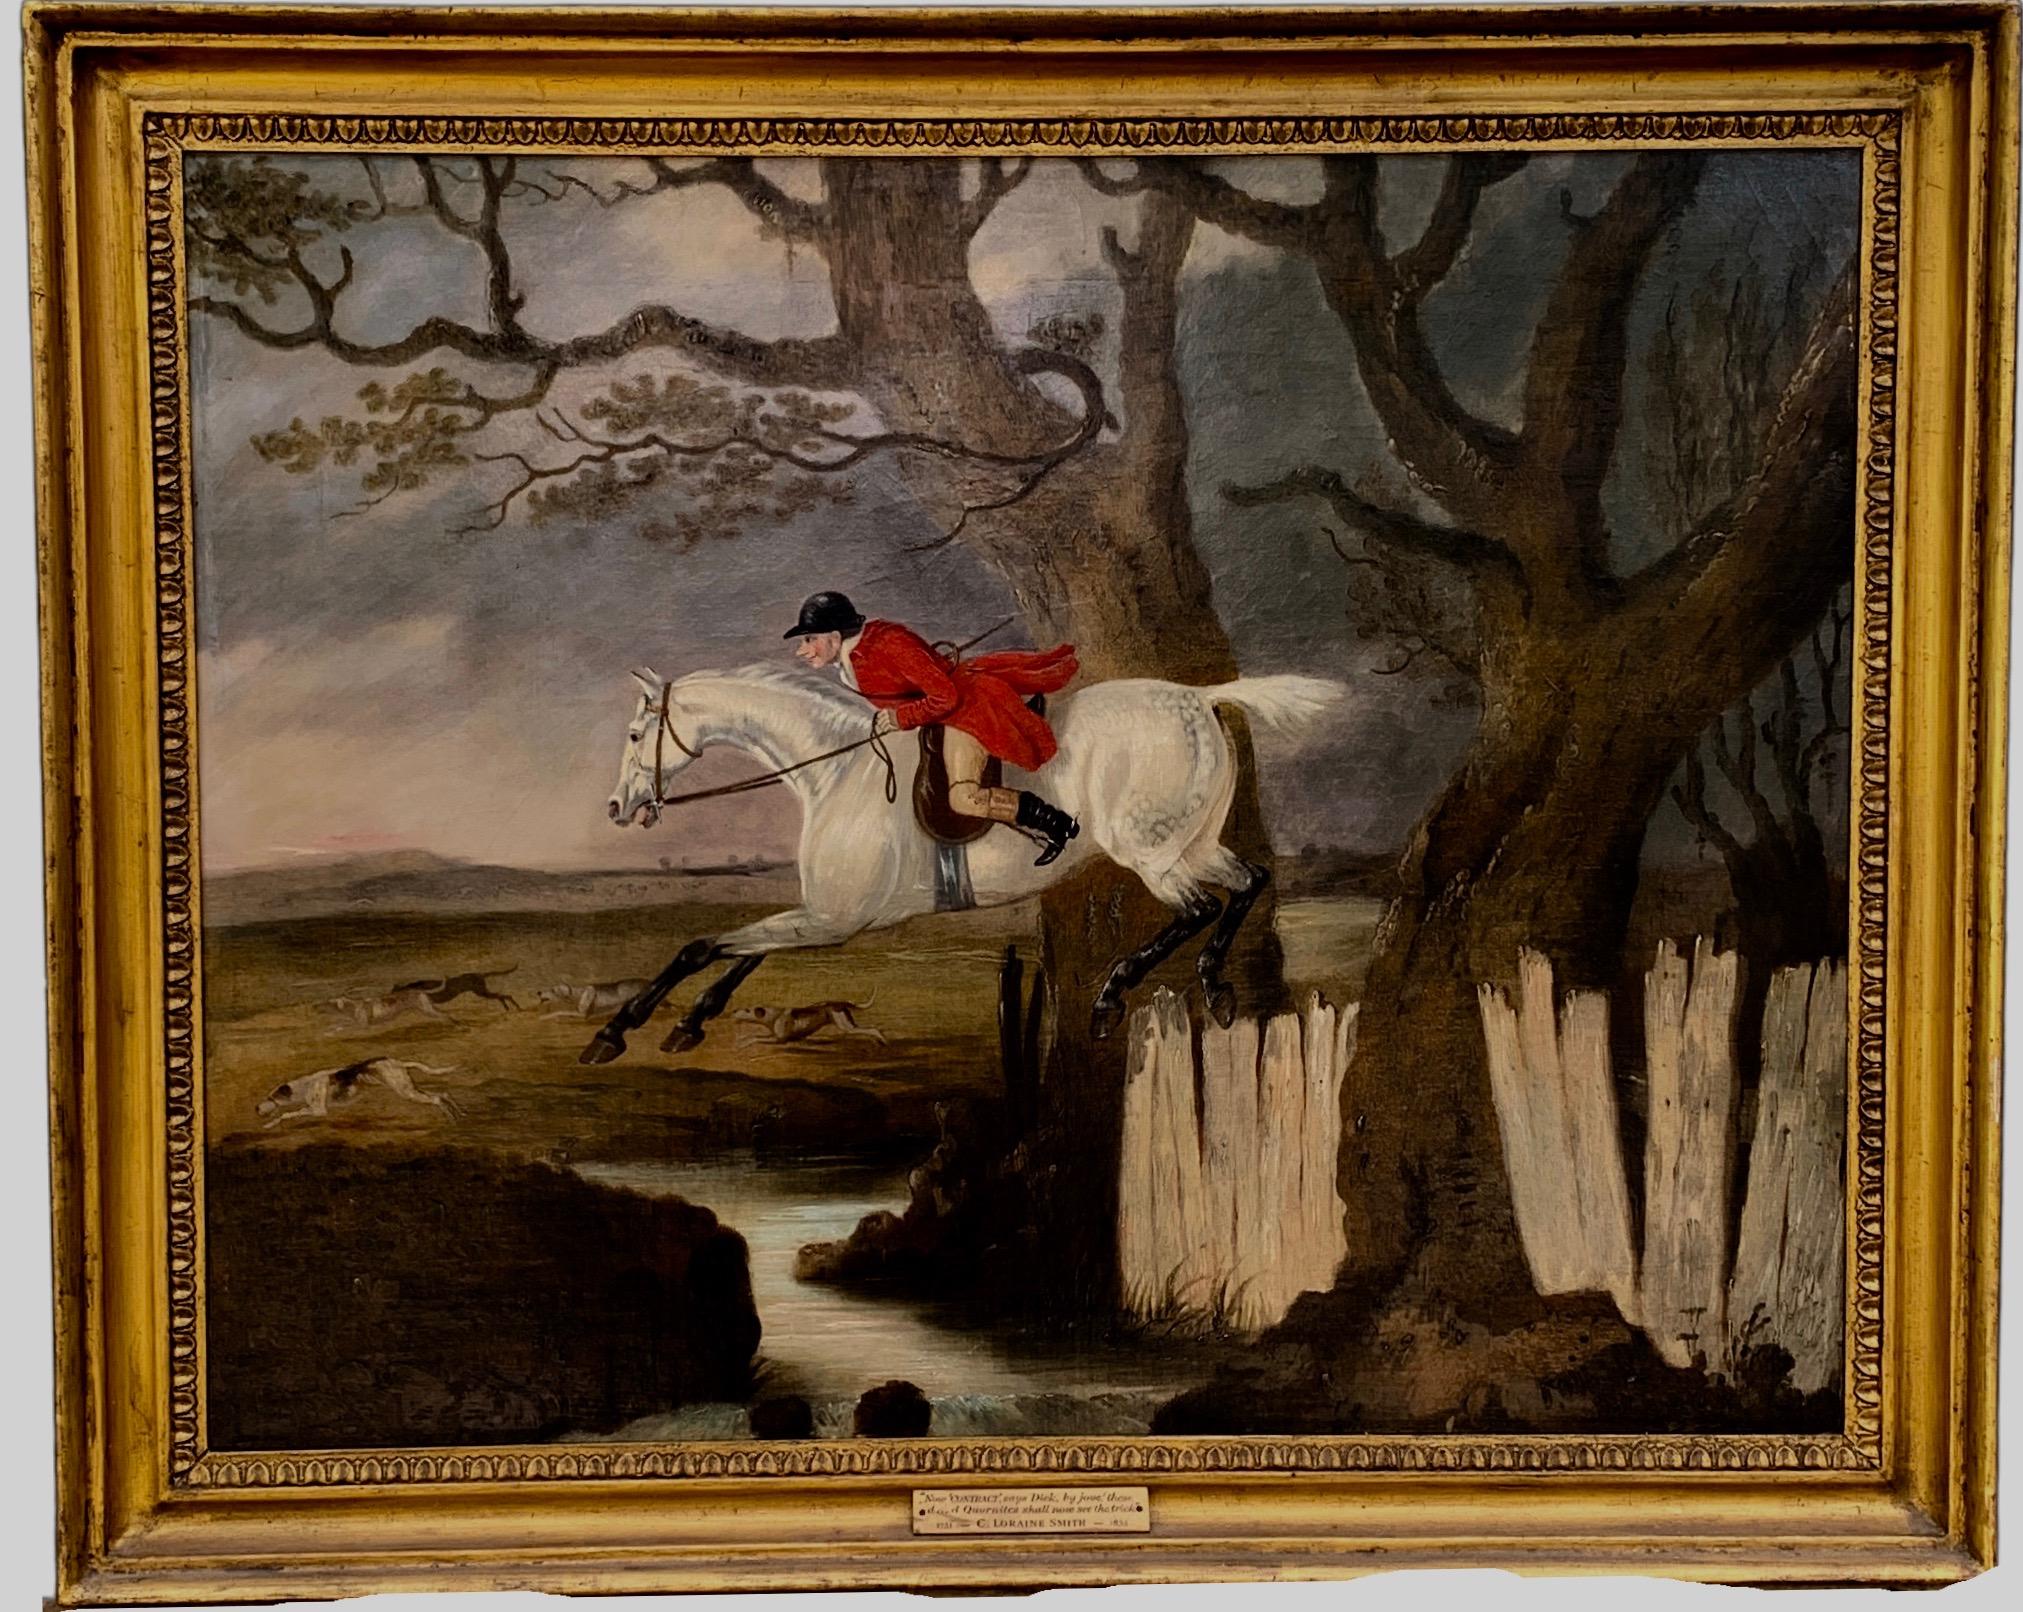 English 18th century Fox hunting landscape, with Dick Knight and Pytchley Hounds - Painting by Charles Loraine Smith